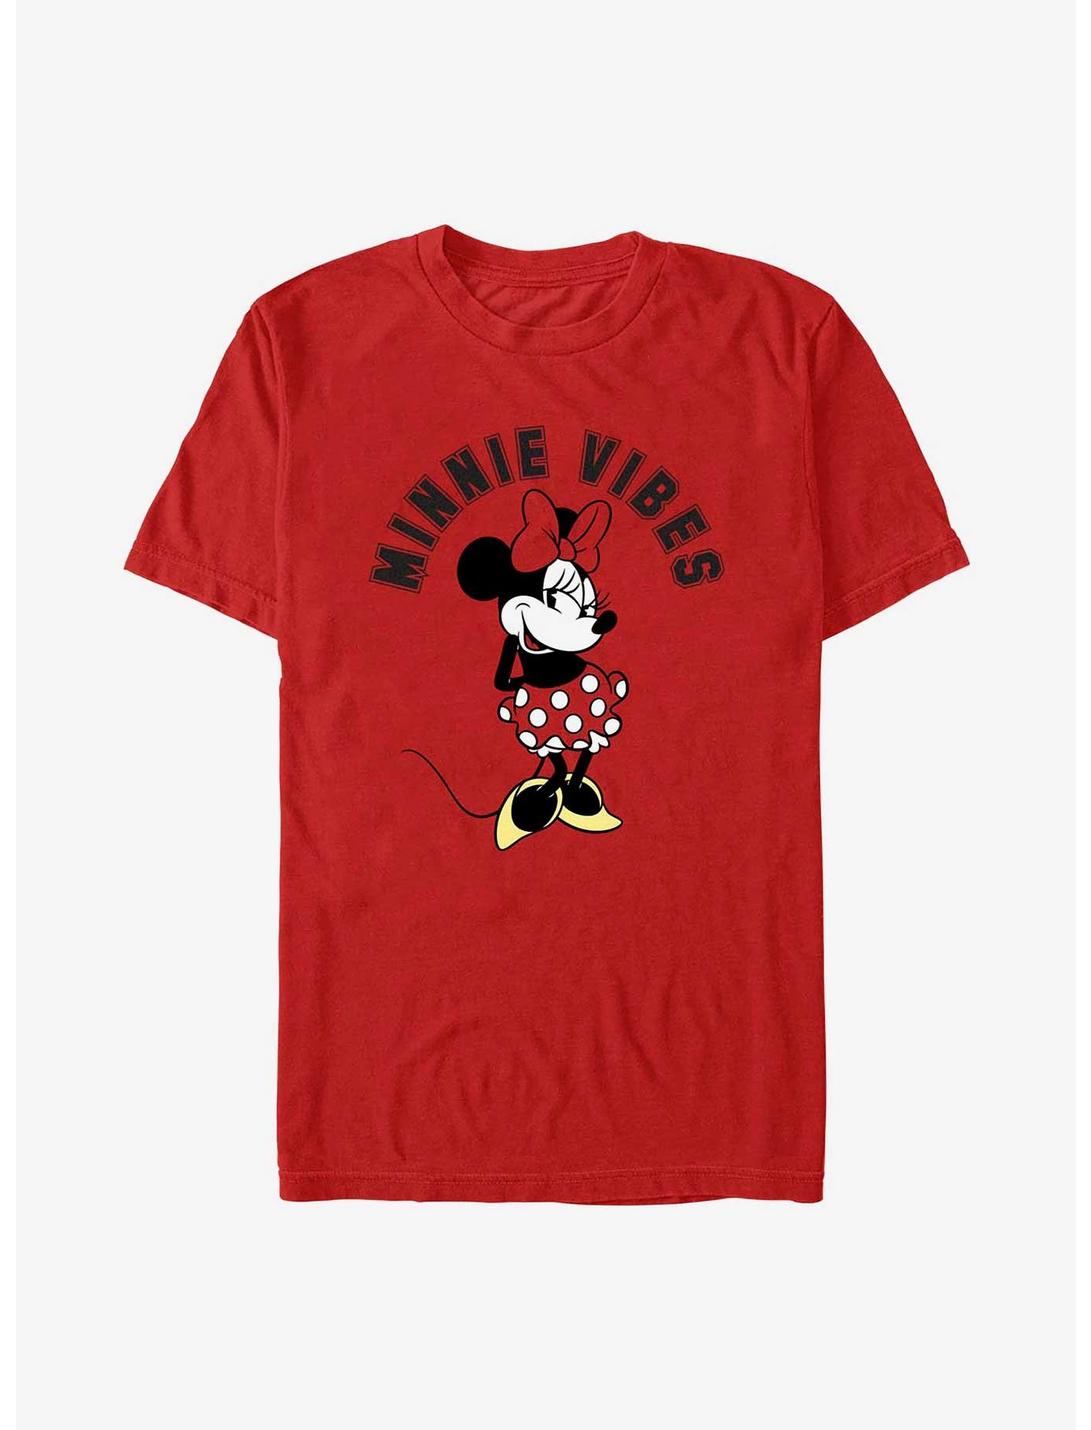 Disney Minnie Mouse Minnie Vibes T-Shirt, RED, hi-res